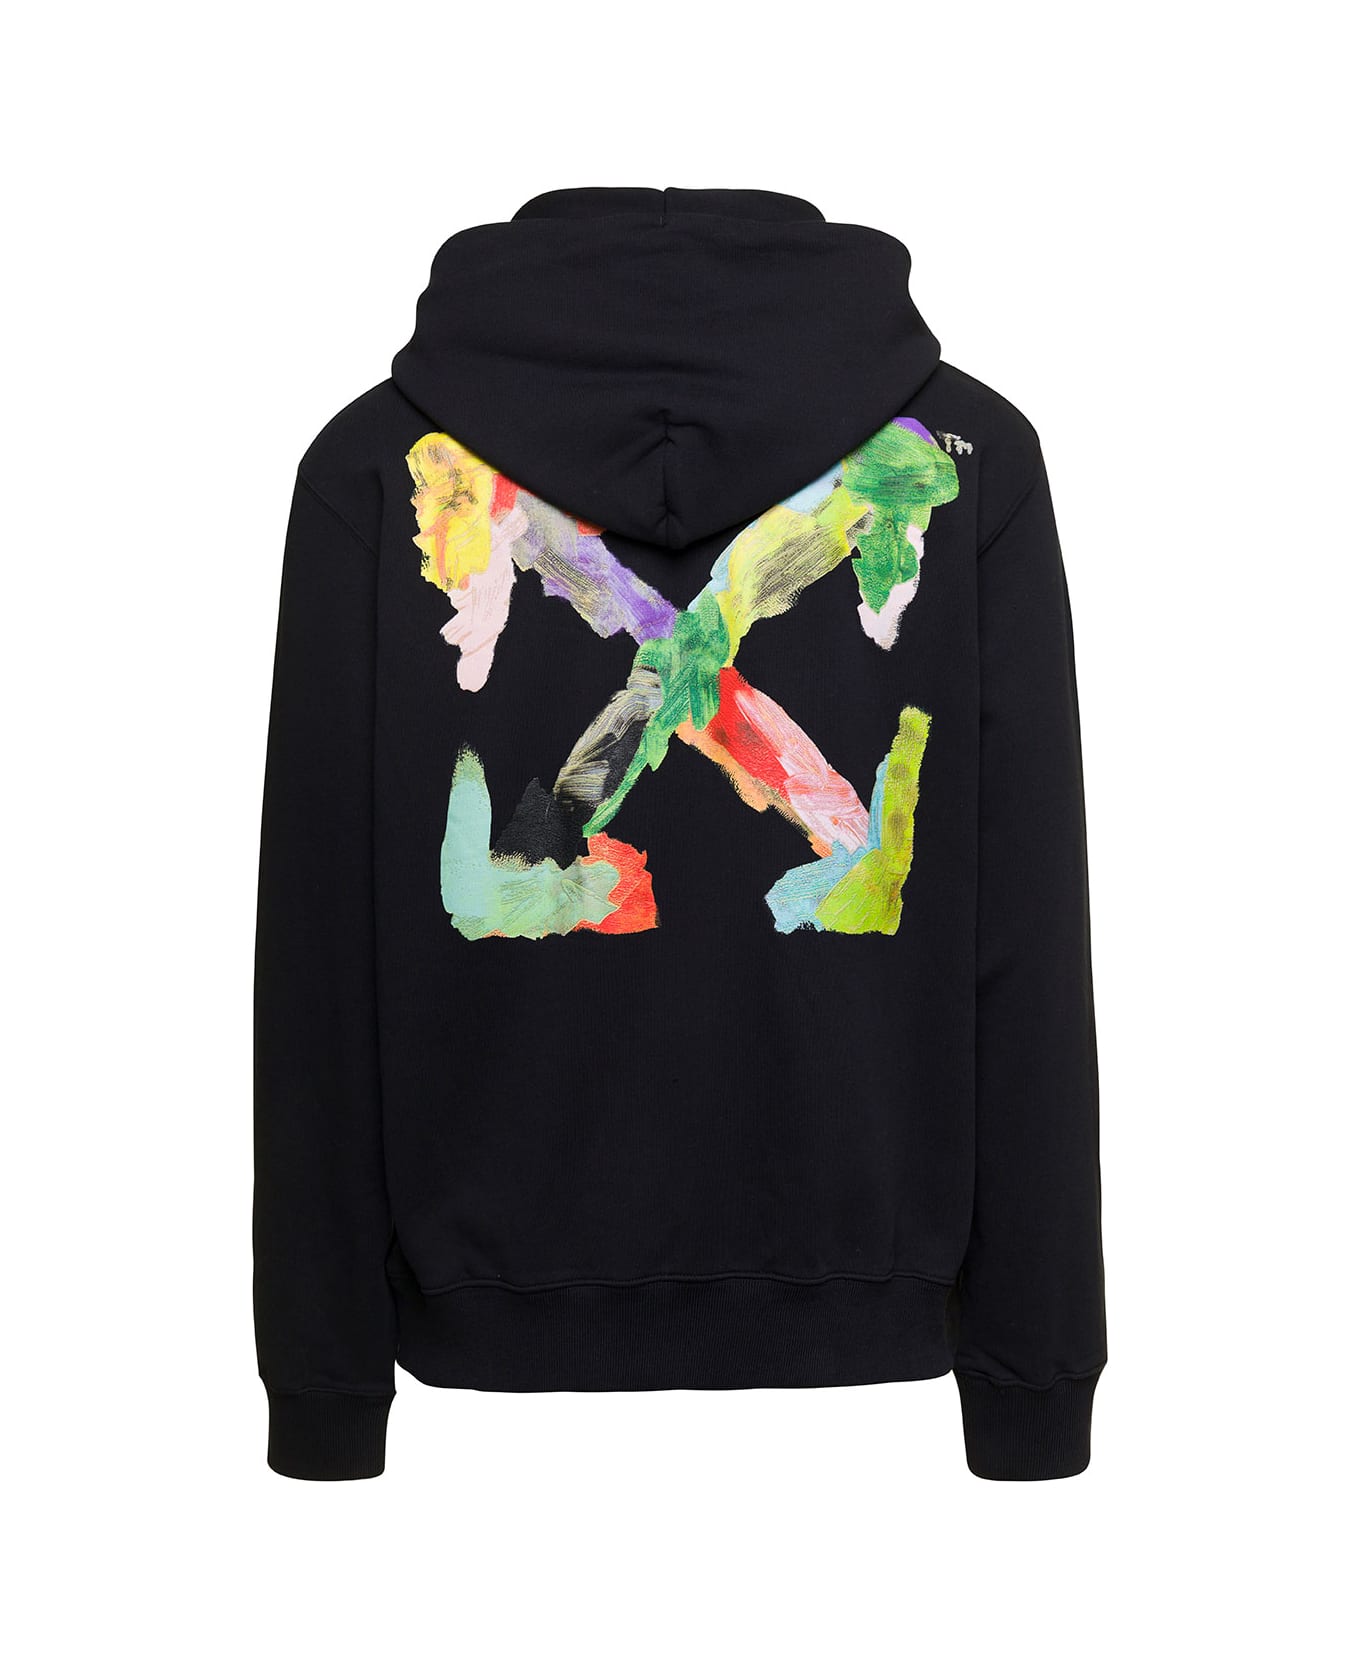 Off-White Black Hoodie With Brush Arrow Motif At The Back In Cotton Man - Black